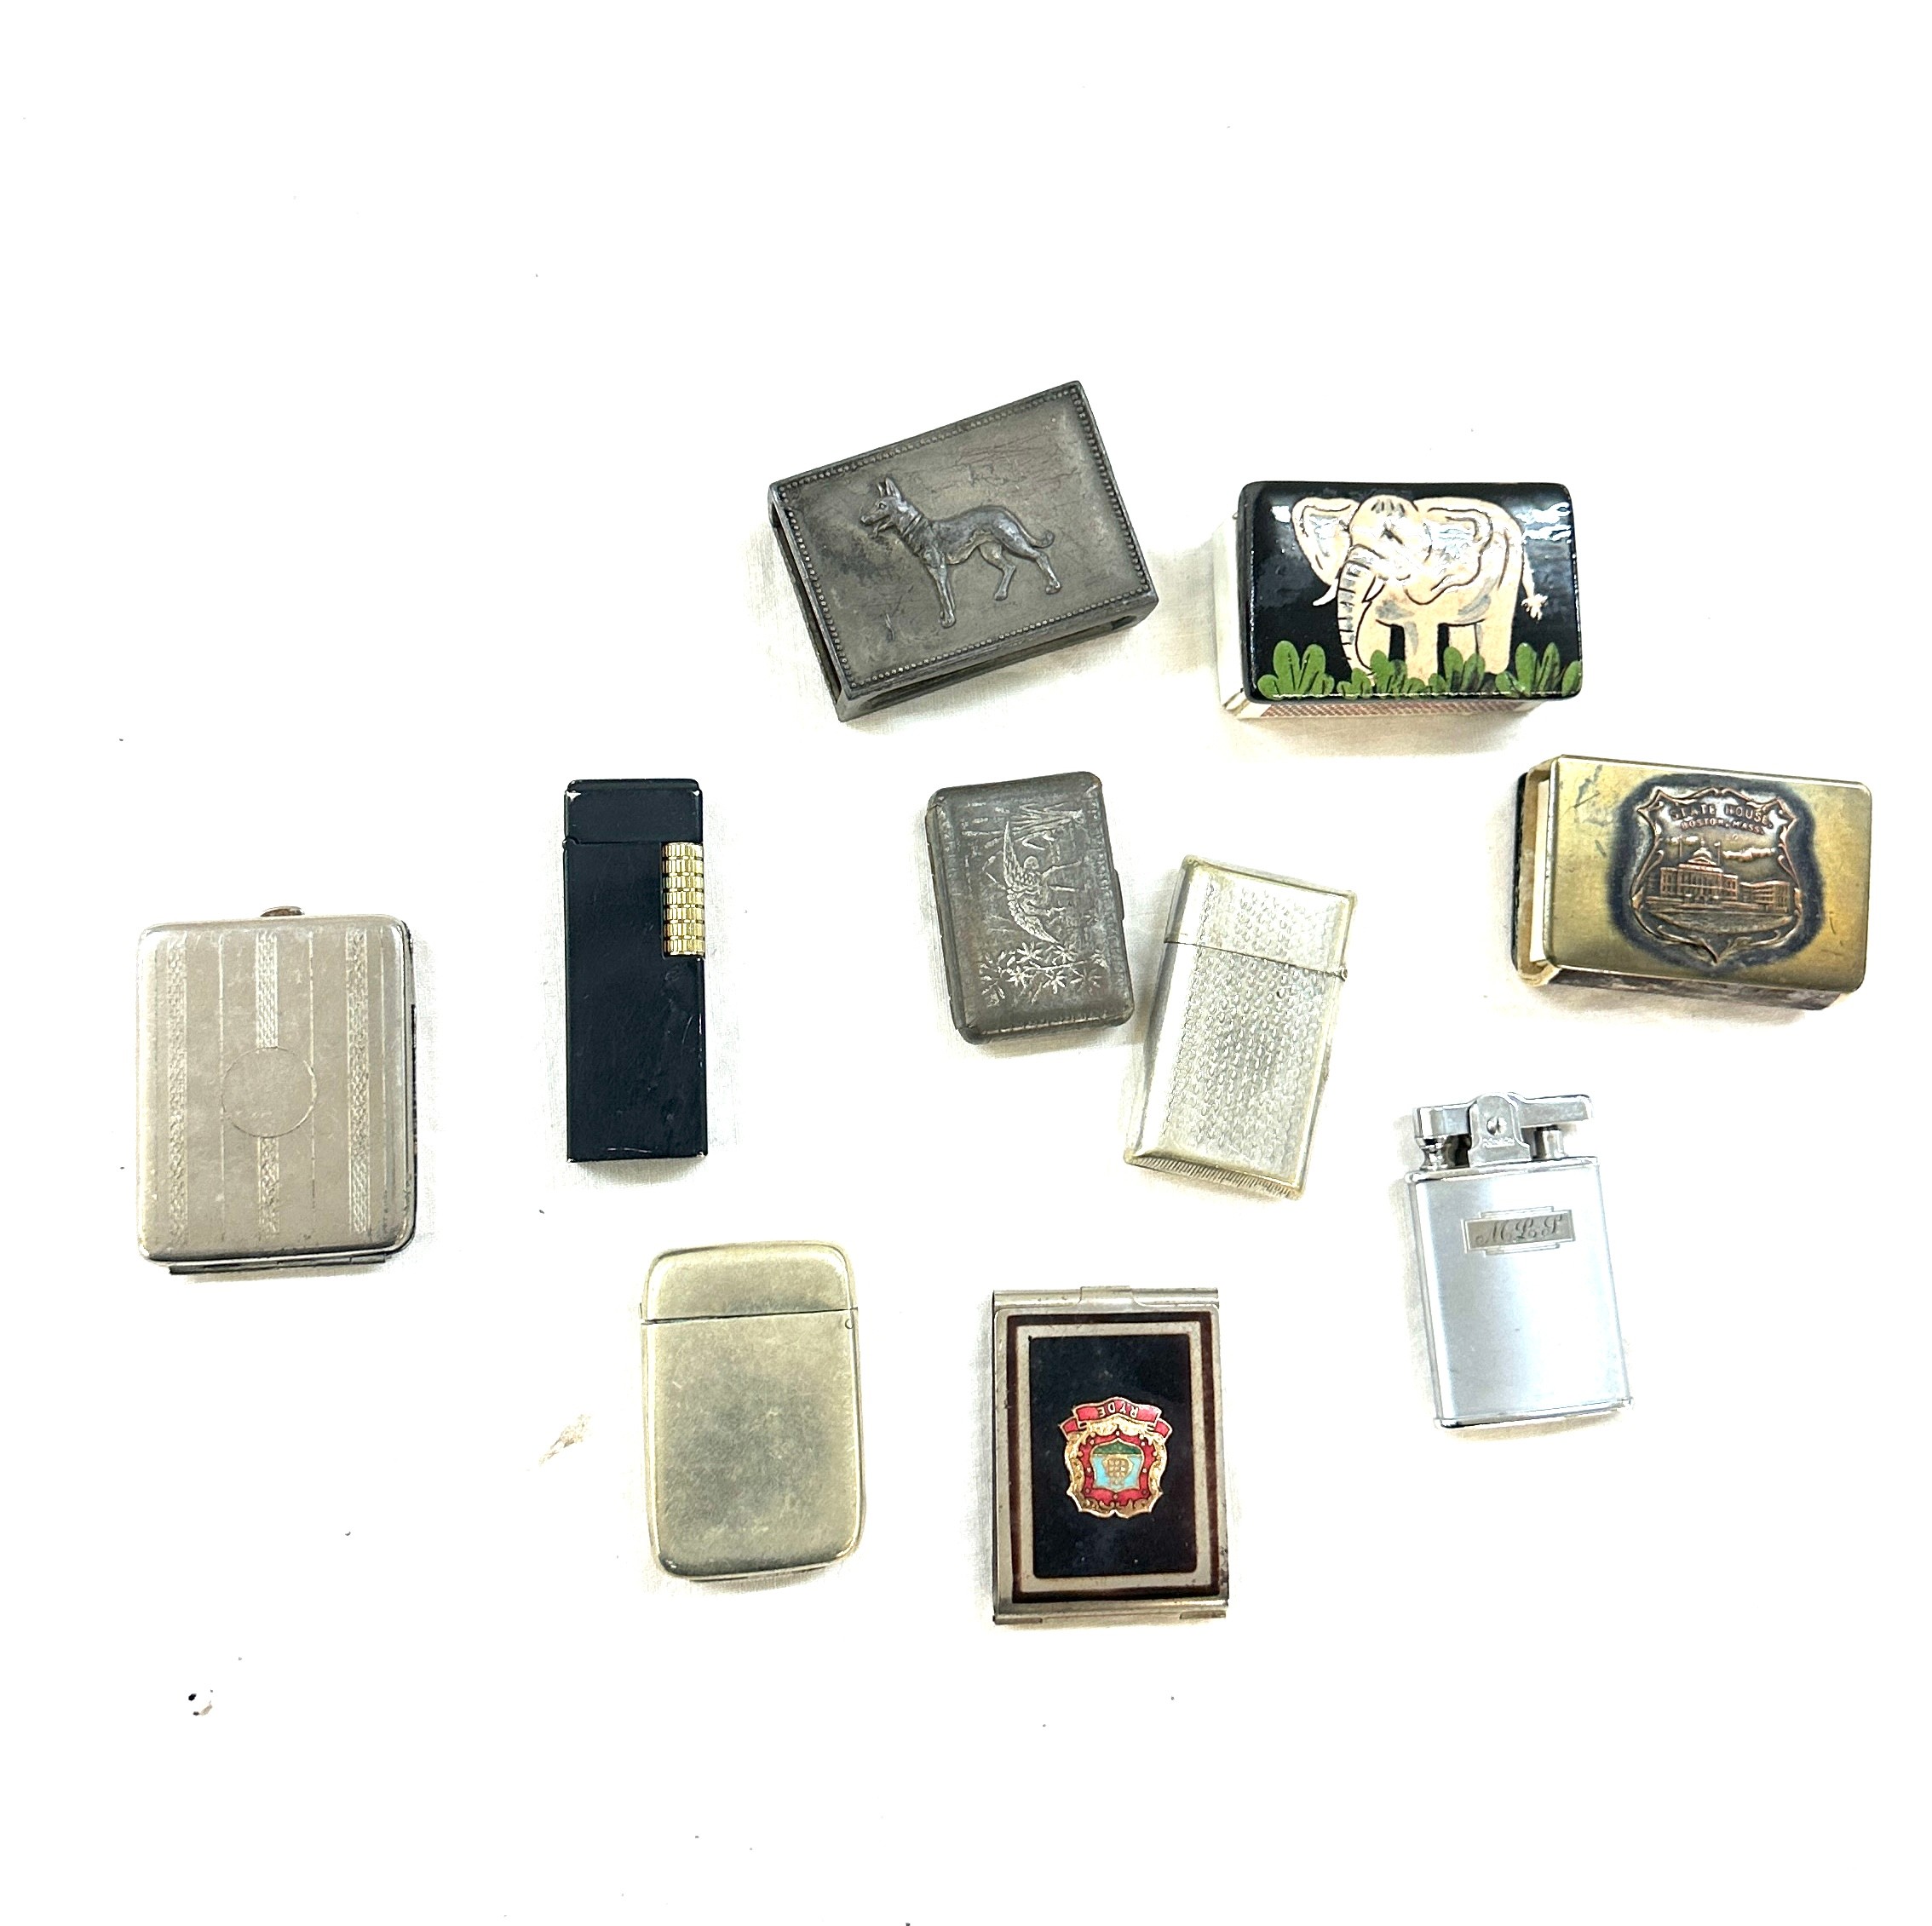 Match cases and lighters - Image 4 of 4